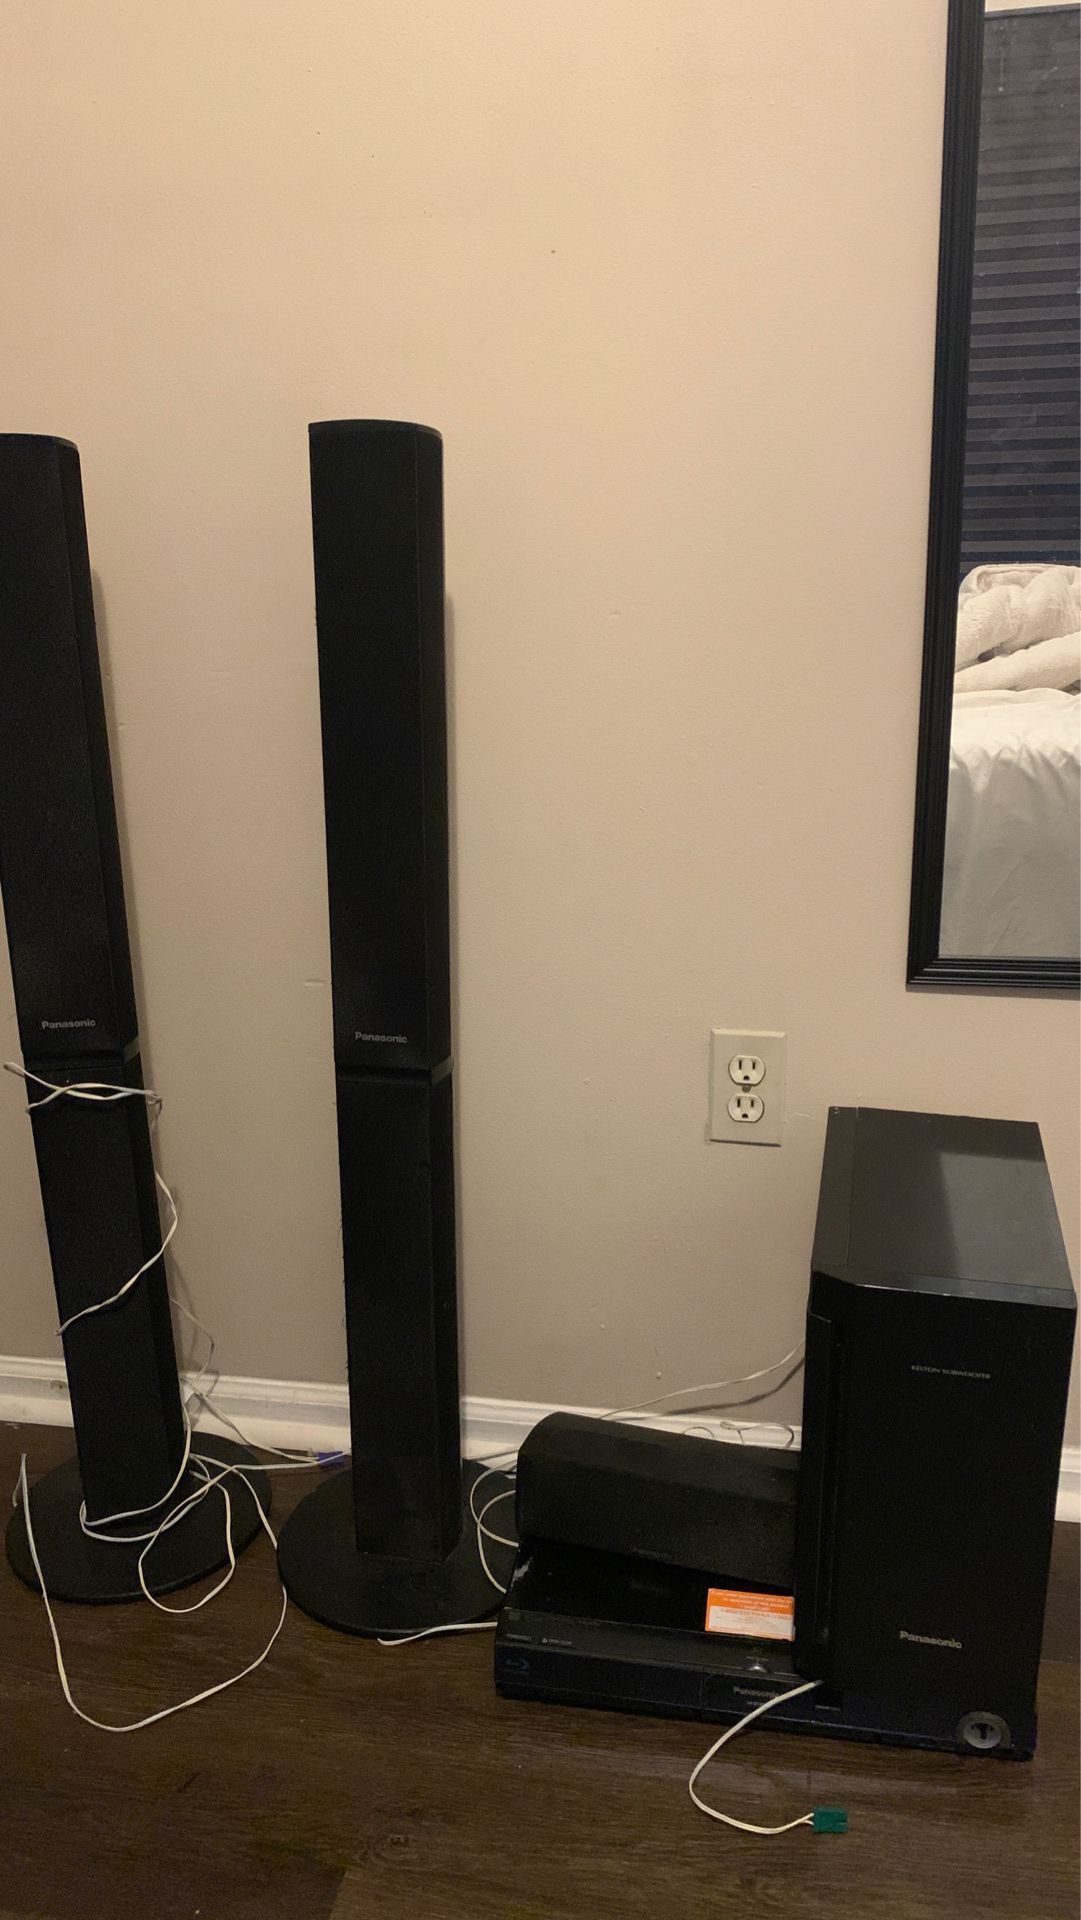 Panasonic surround system 5.1 with subwoofer